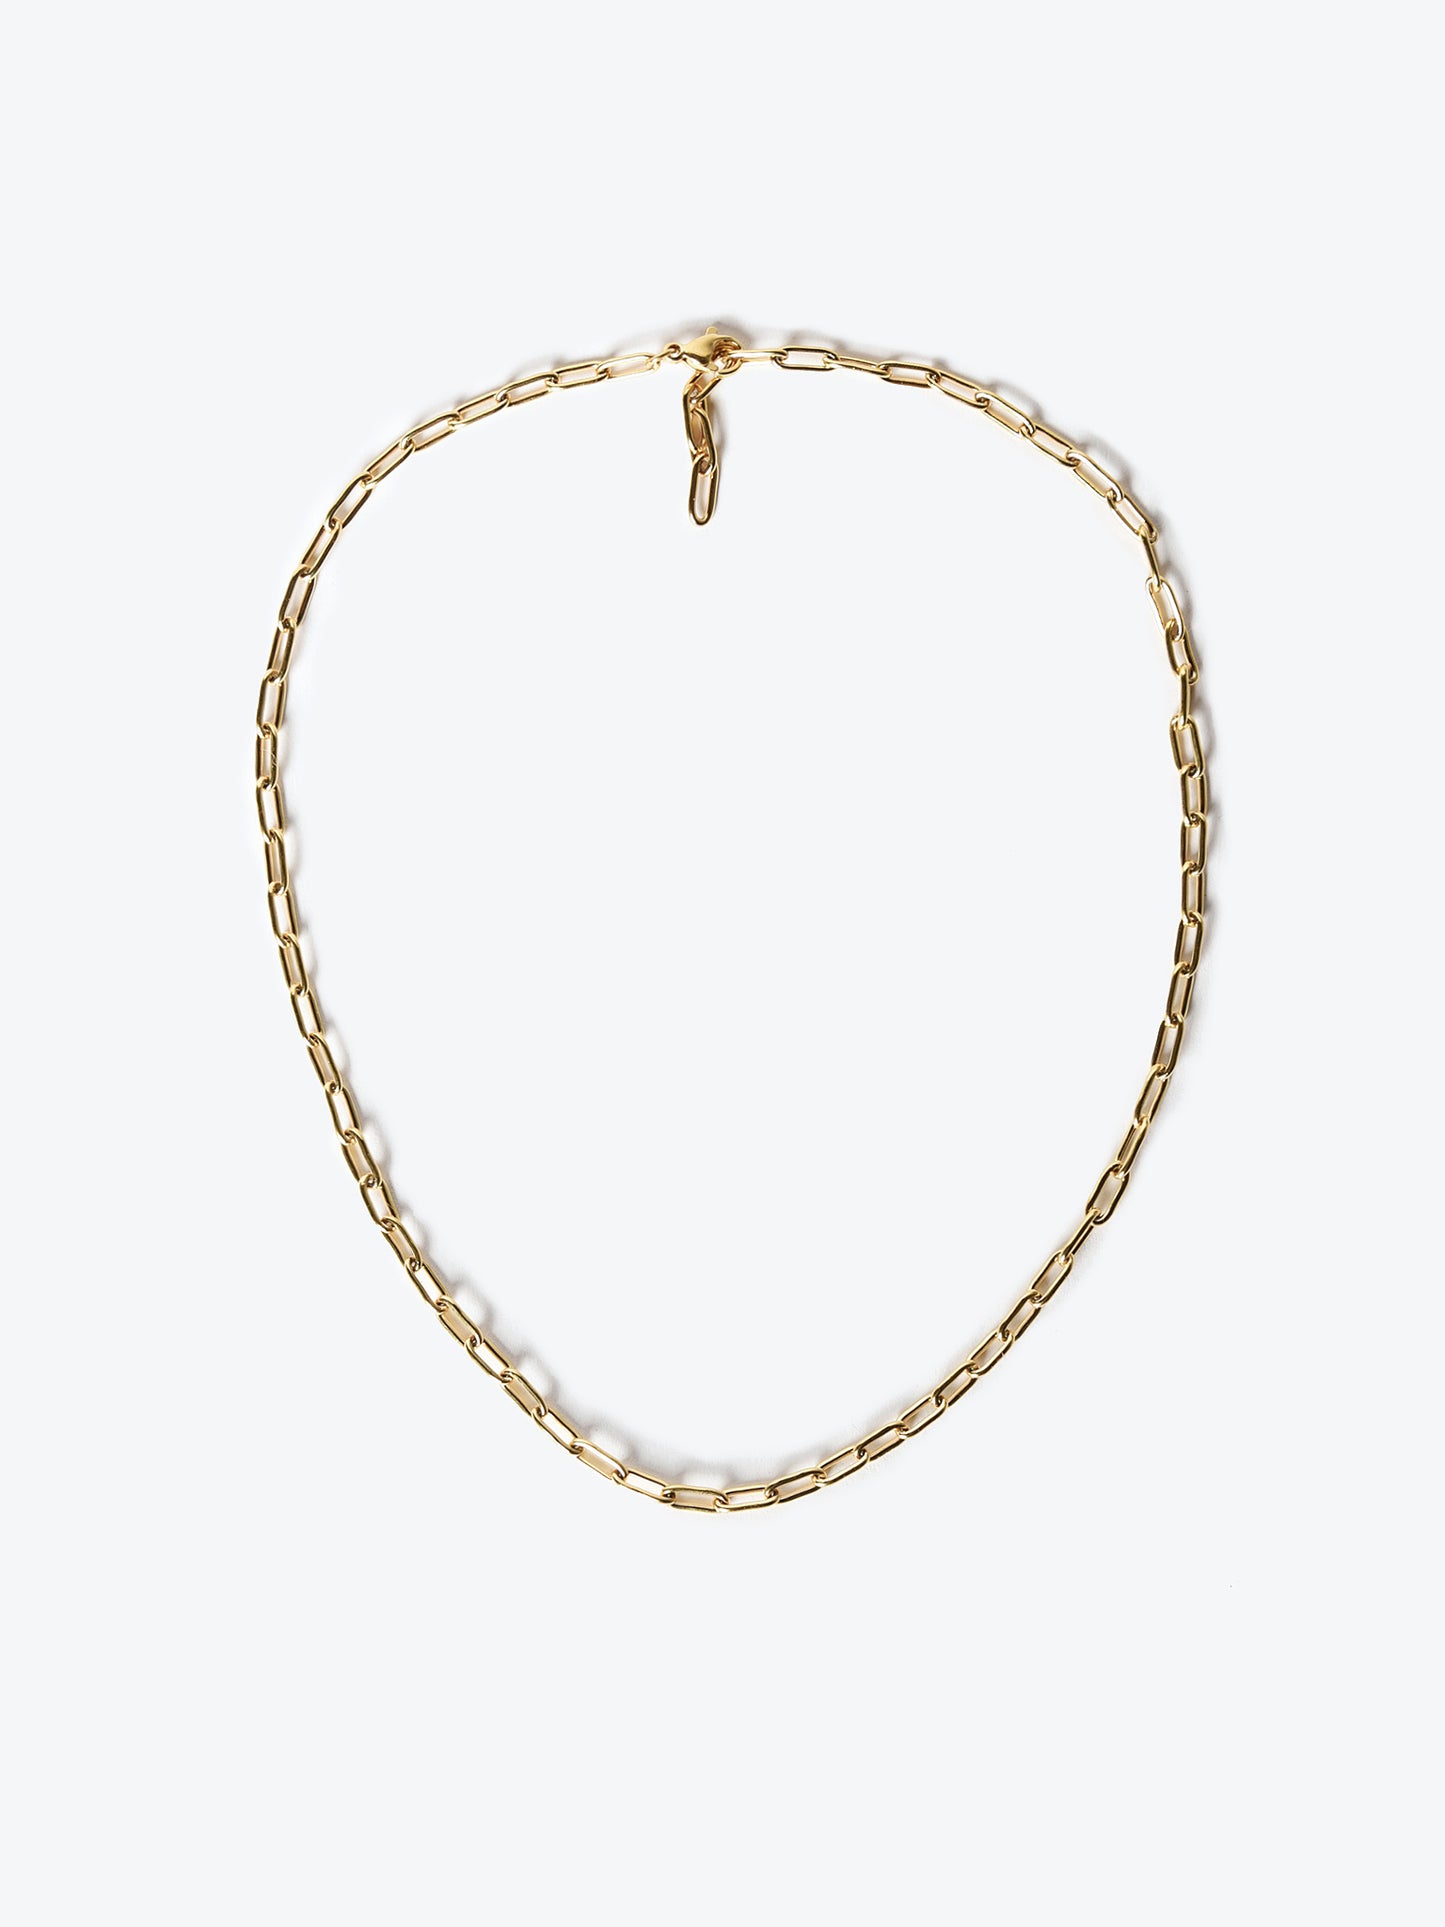 TAI Women's Gold Plated Chain Link Necklace